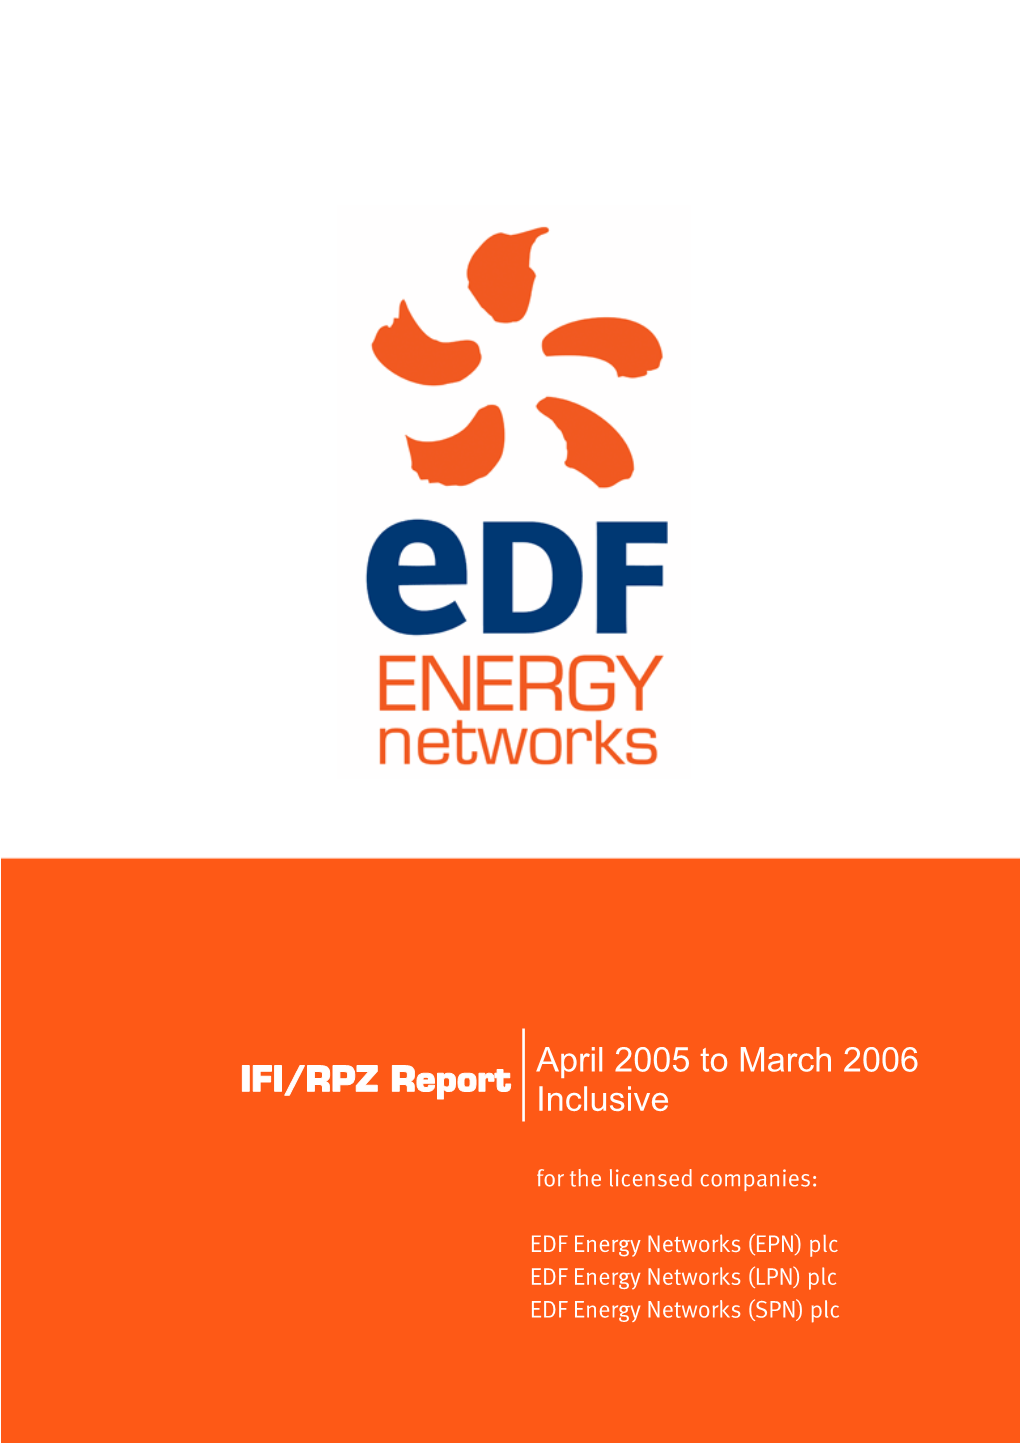 IFI/RPZ Report for the Licensed Companies EDF Energy Networks